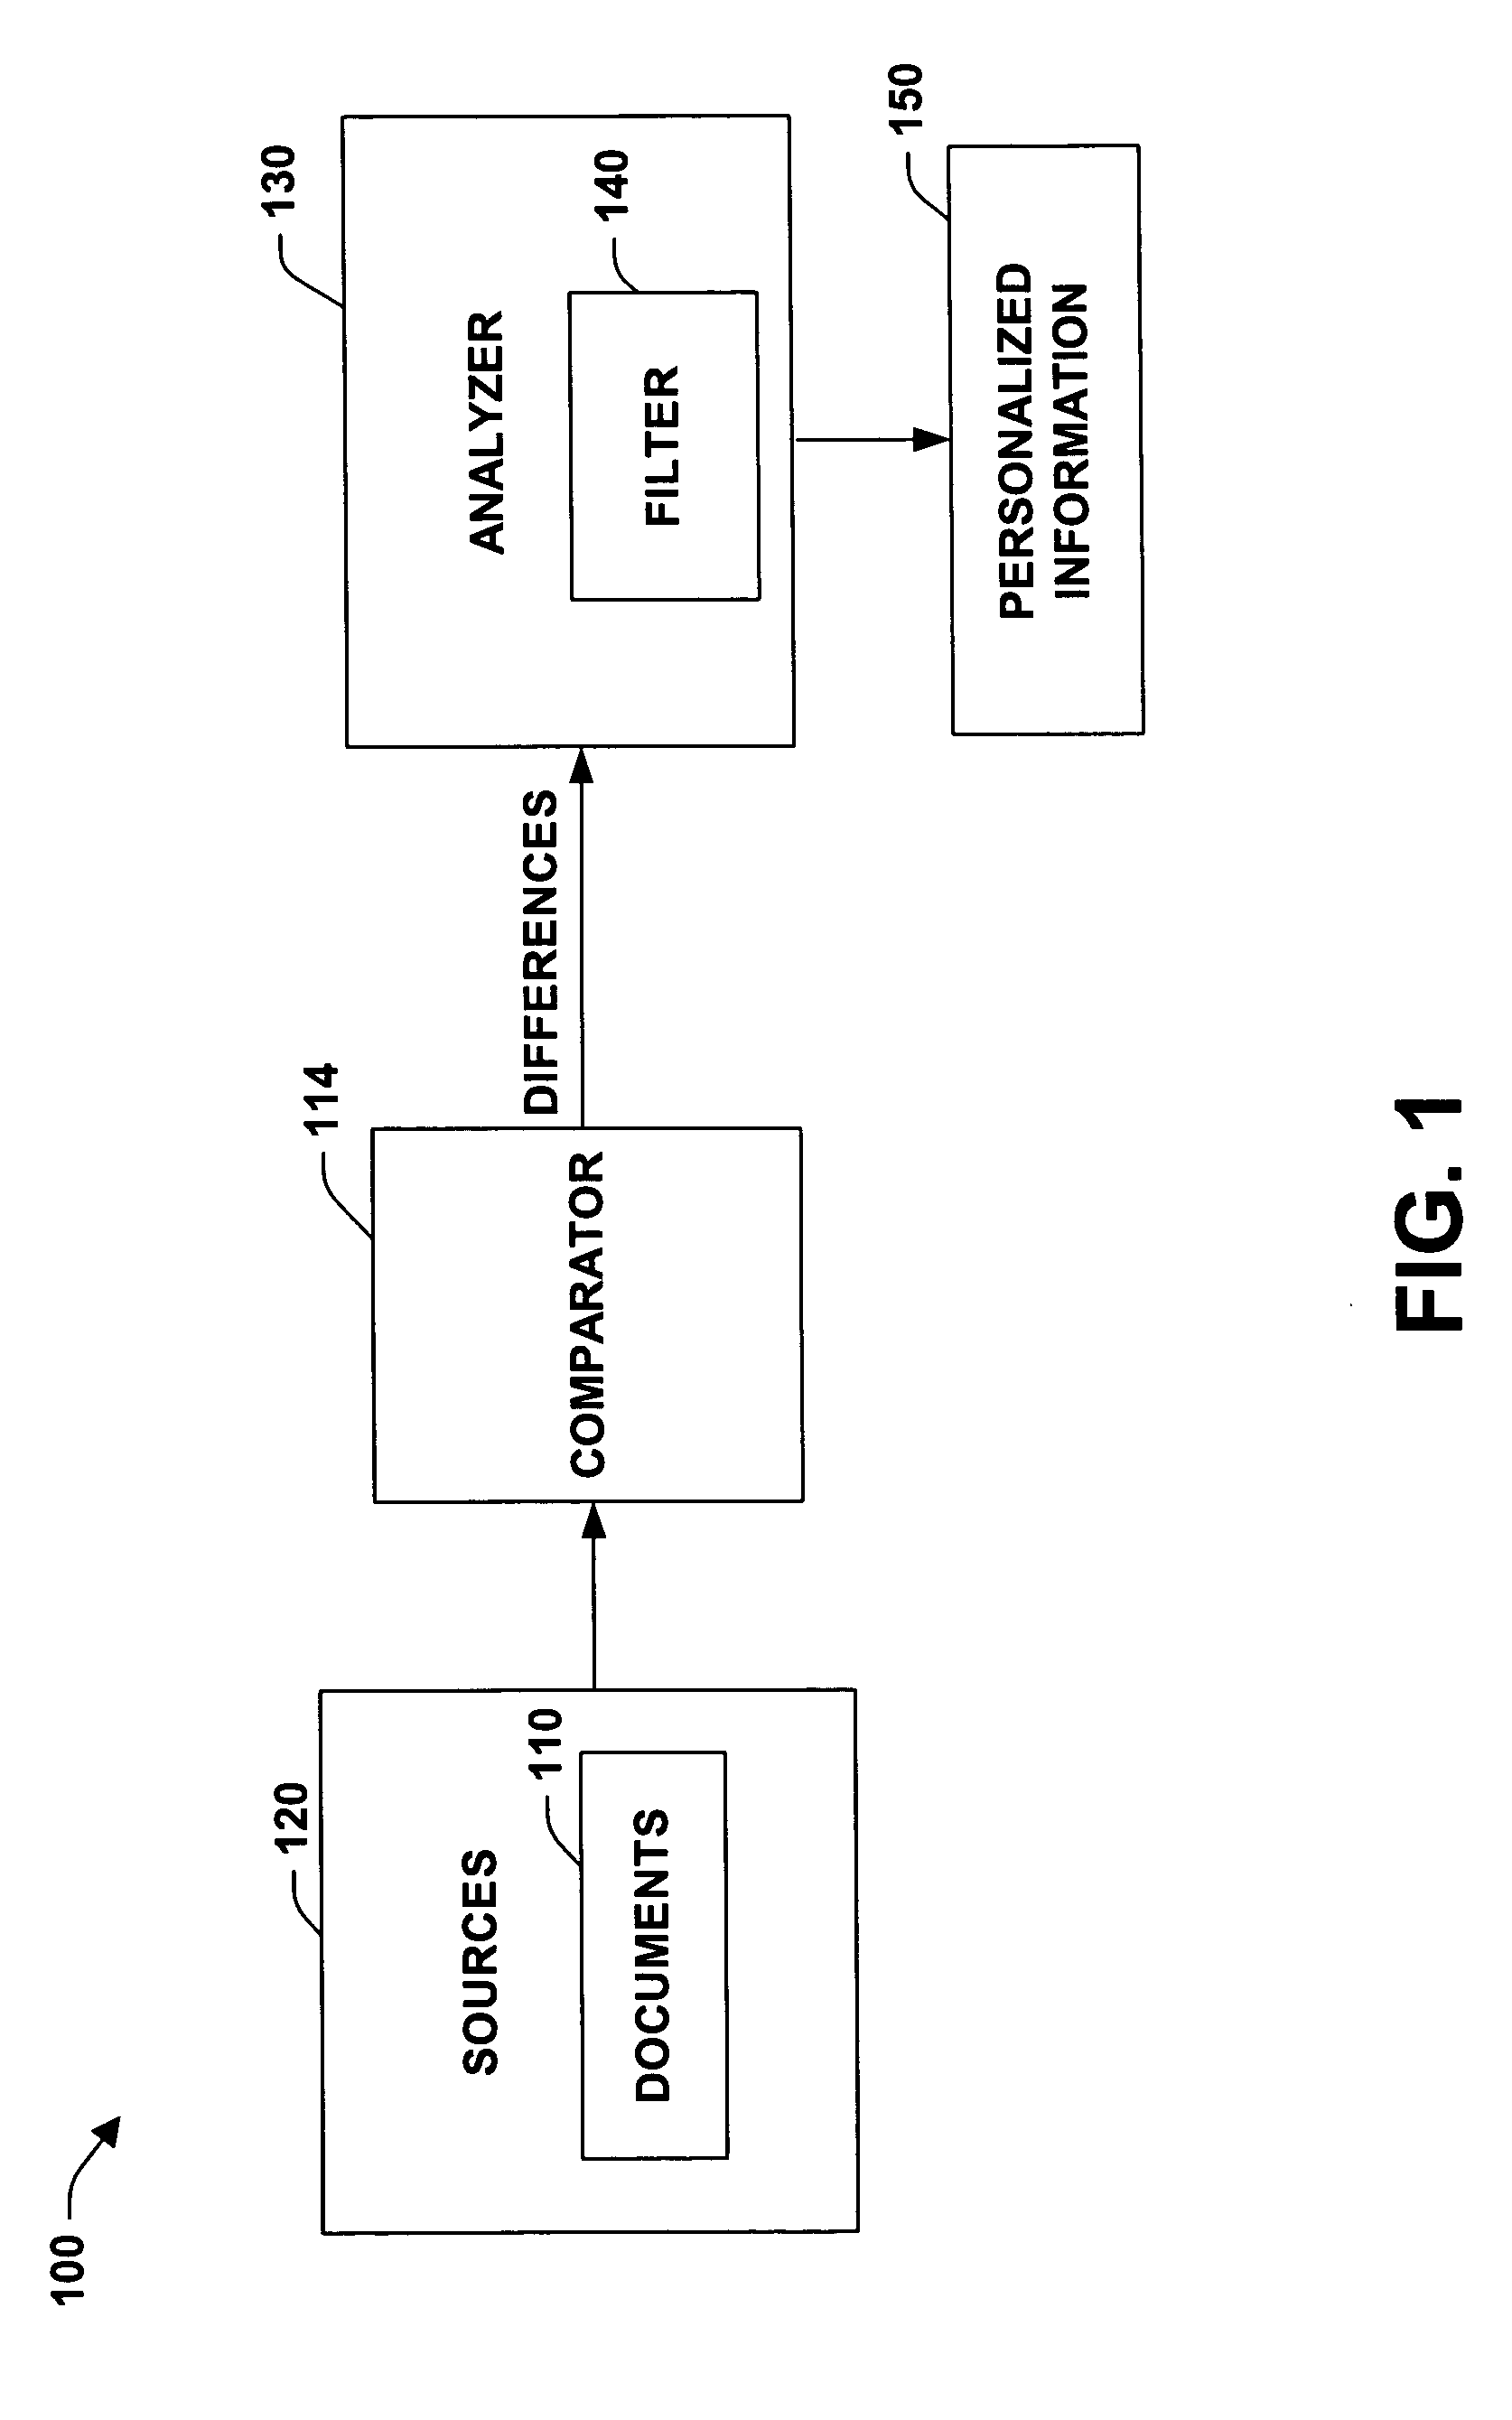 Principles and methods for personalizing newsfeeds via an analysis of information novelty and dynamics